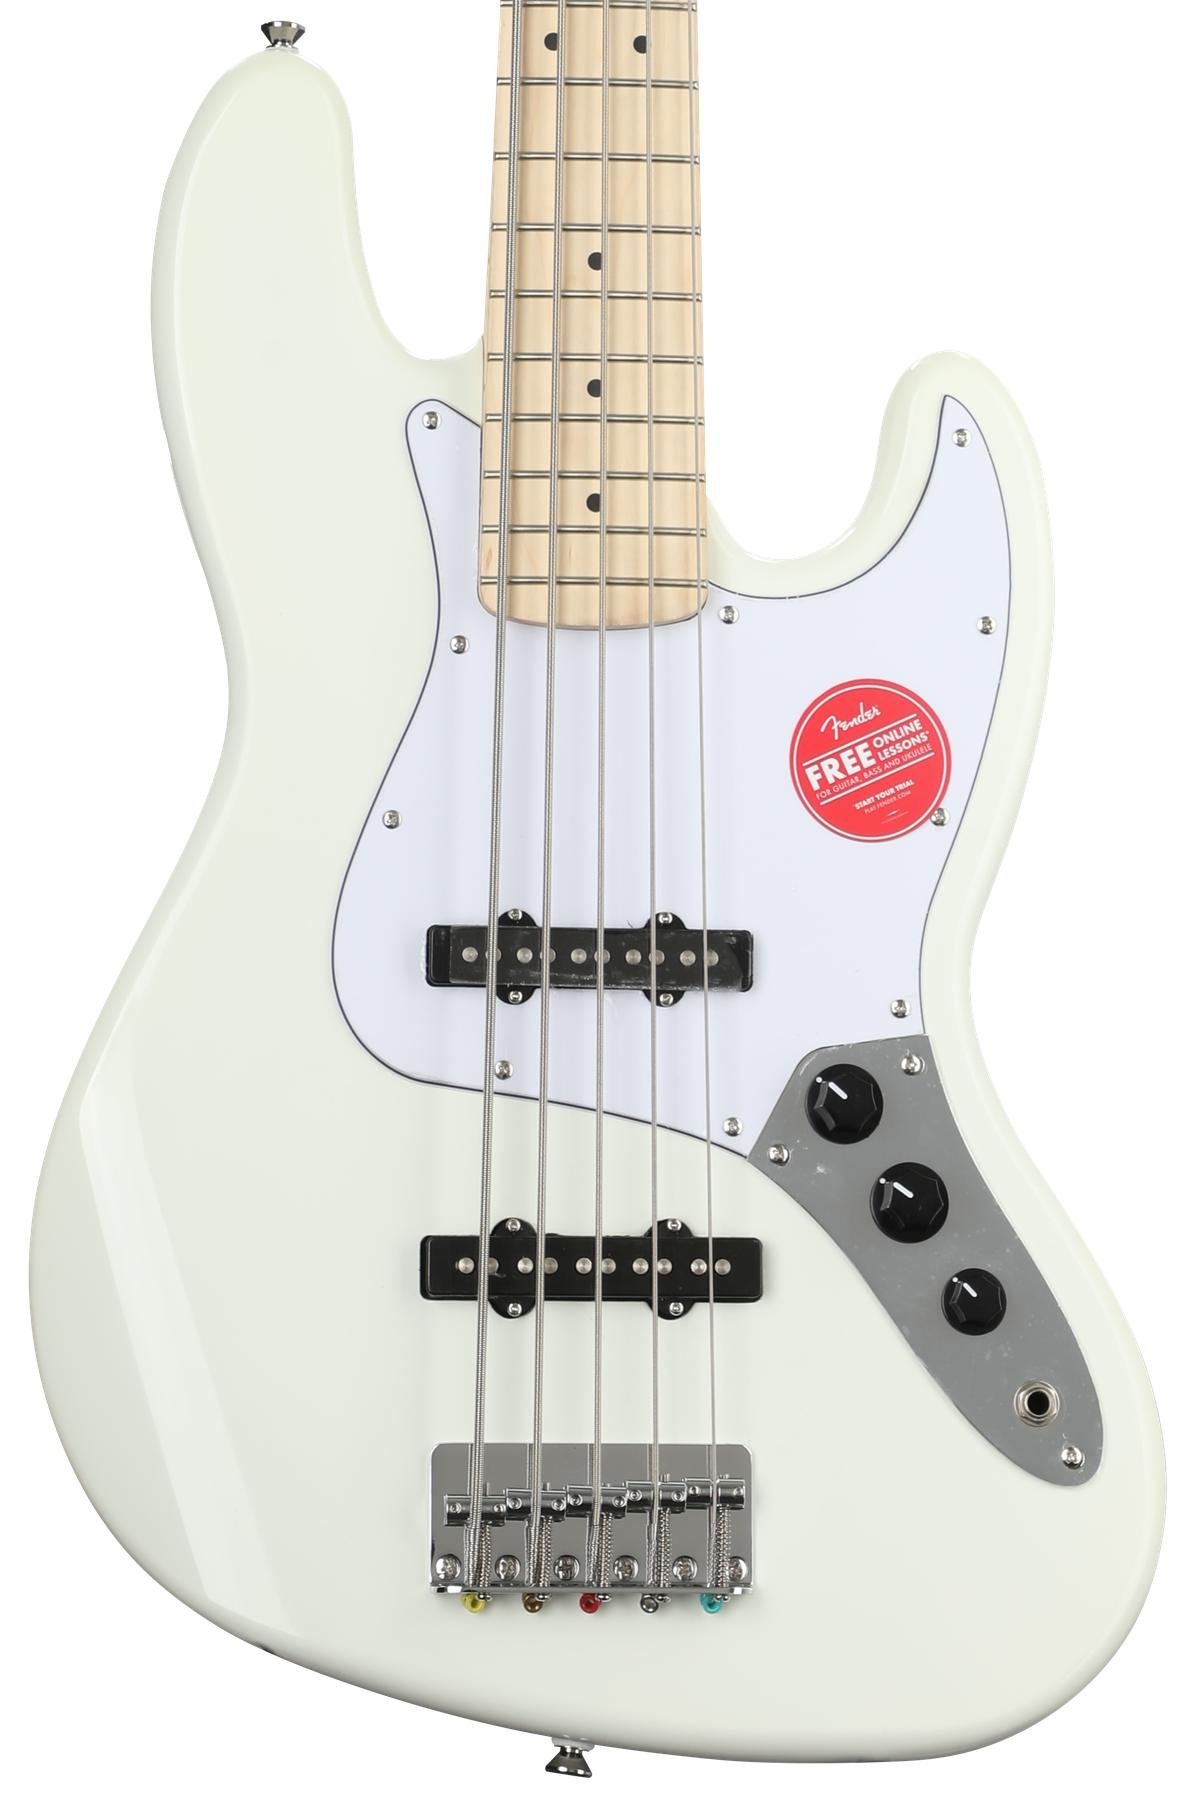 Jual Squier Affinity Jazz Bass V 5 String Electric Bass Guitar,